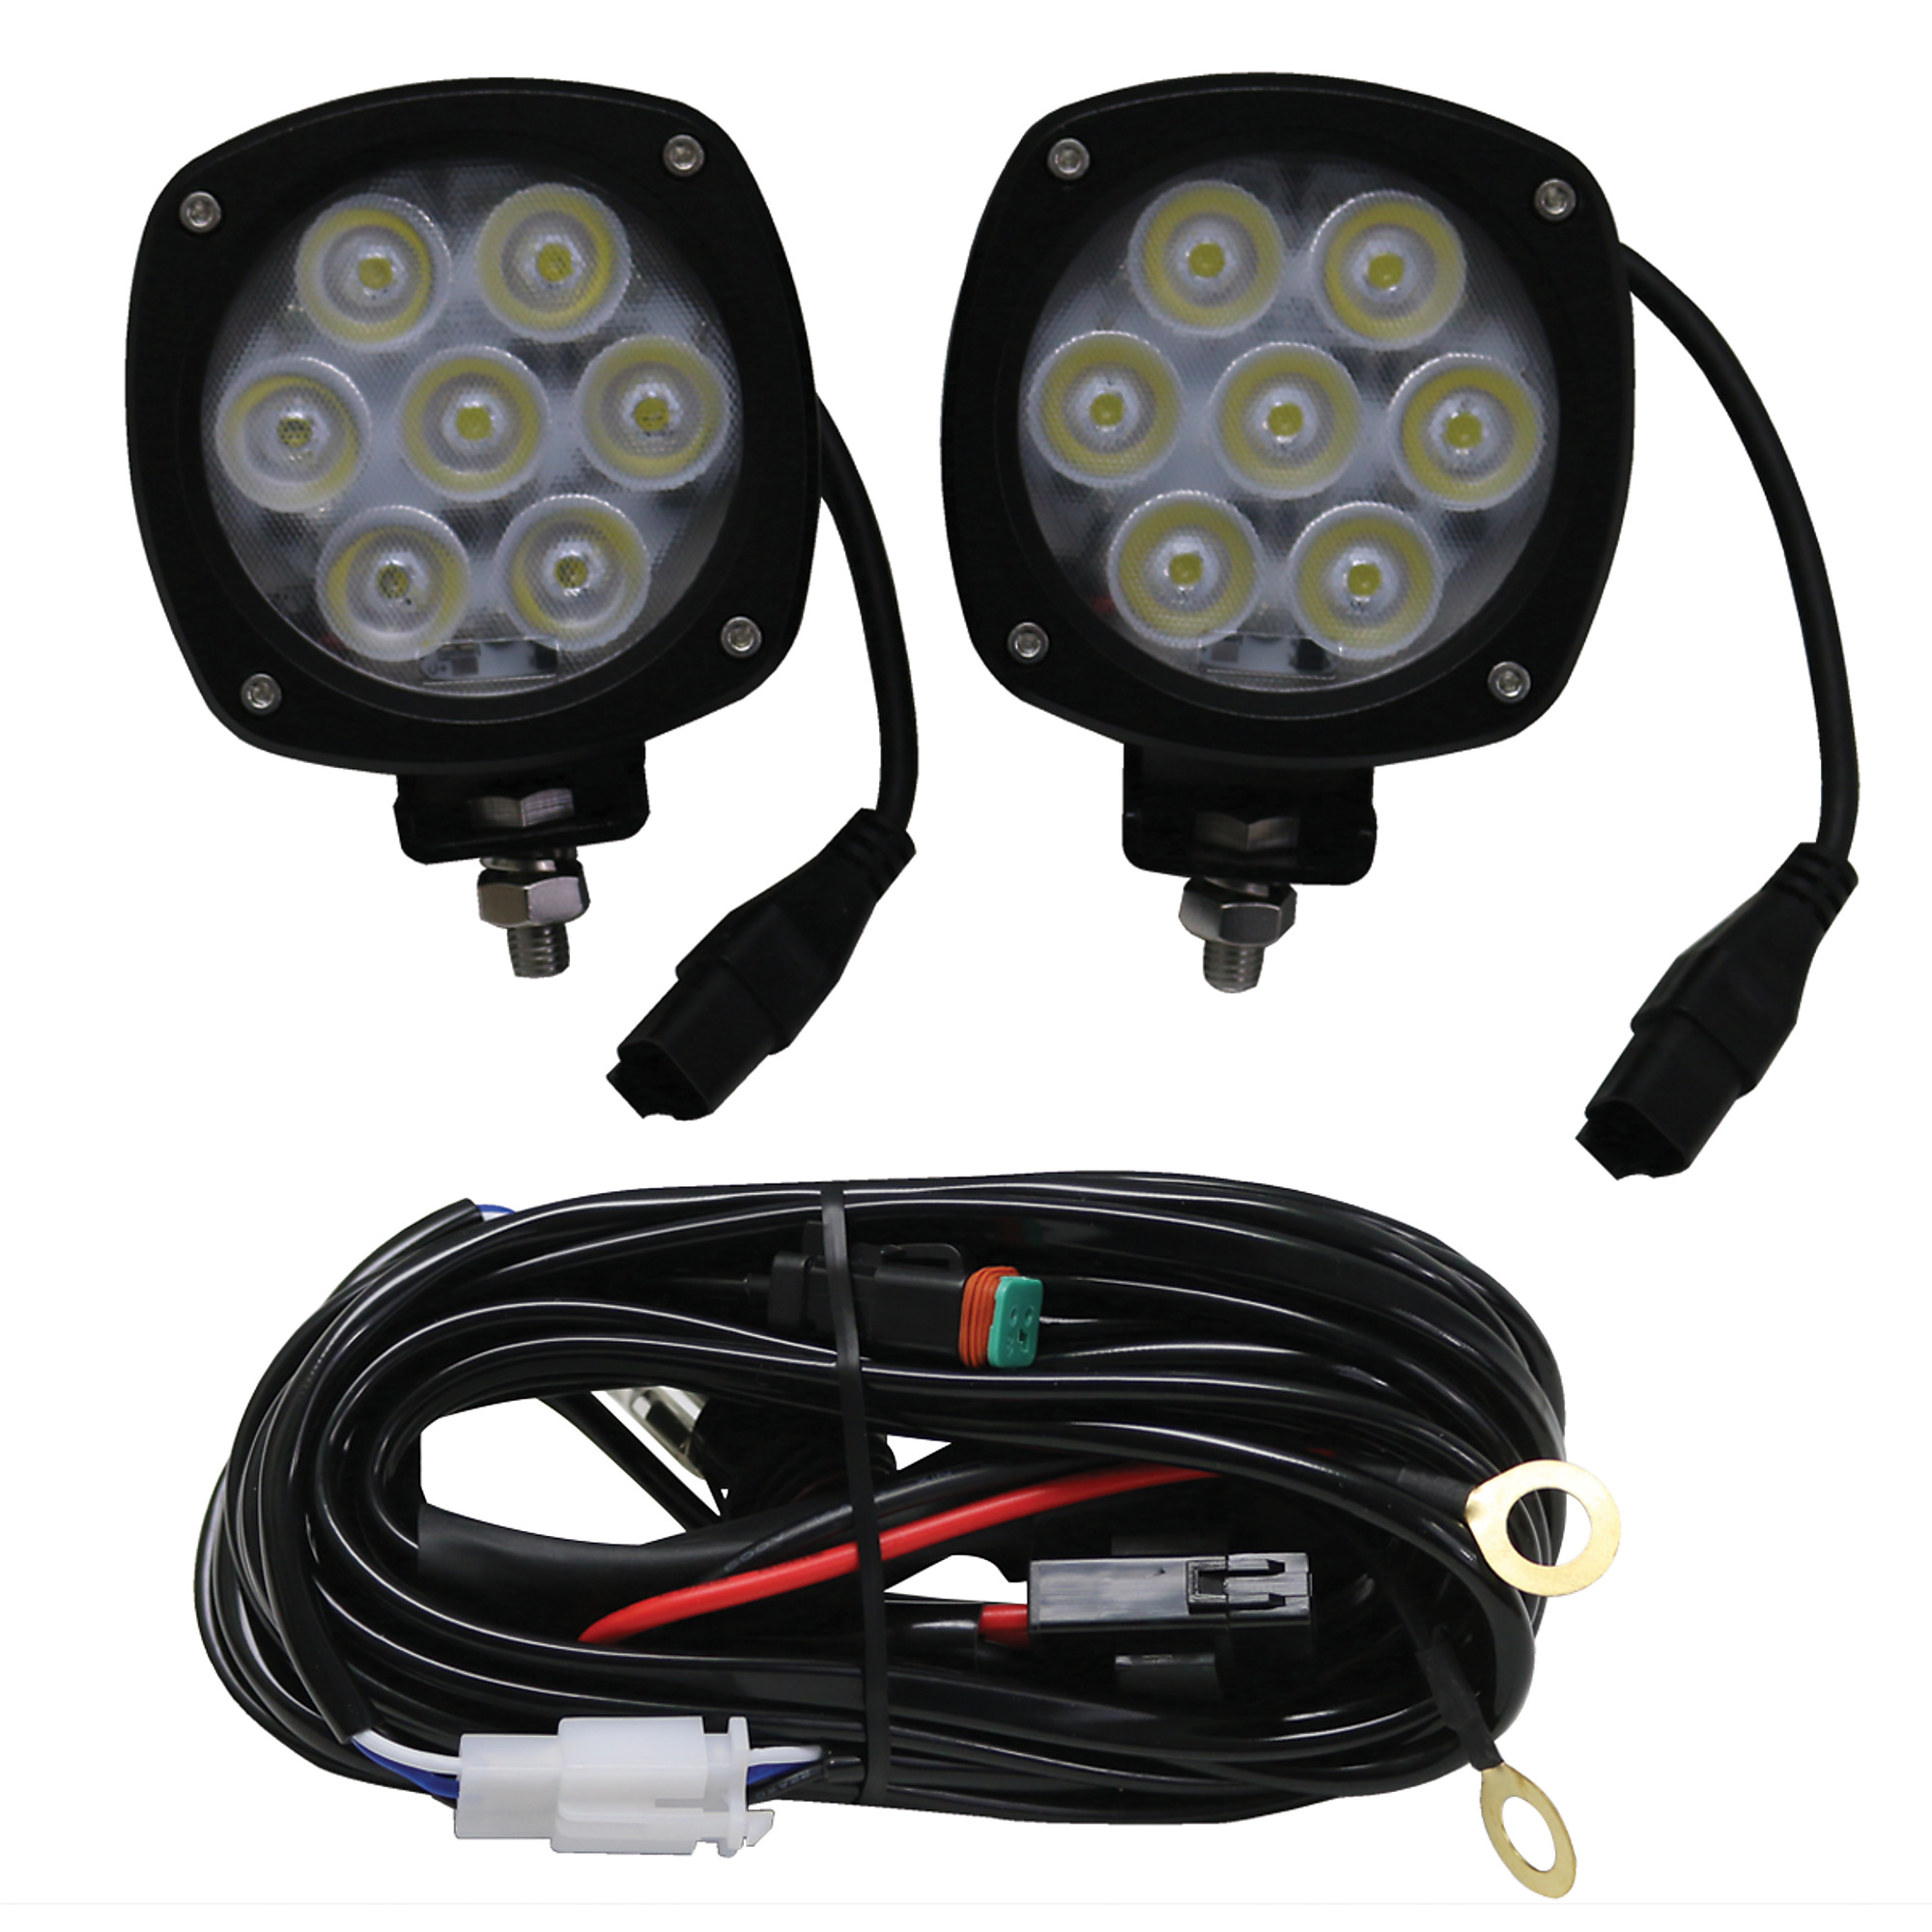 Race Sport Lighting, HD Series 4.3Inch Round CREE LED Spot light - Pair, Light Type LED, Lens Color Clear, Included (qty.) 2 Model 1003697